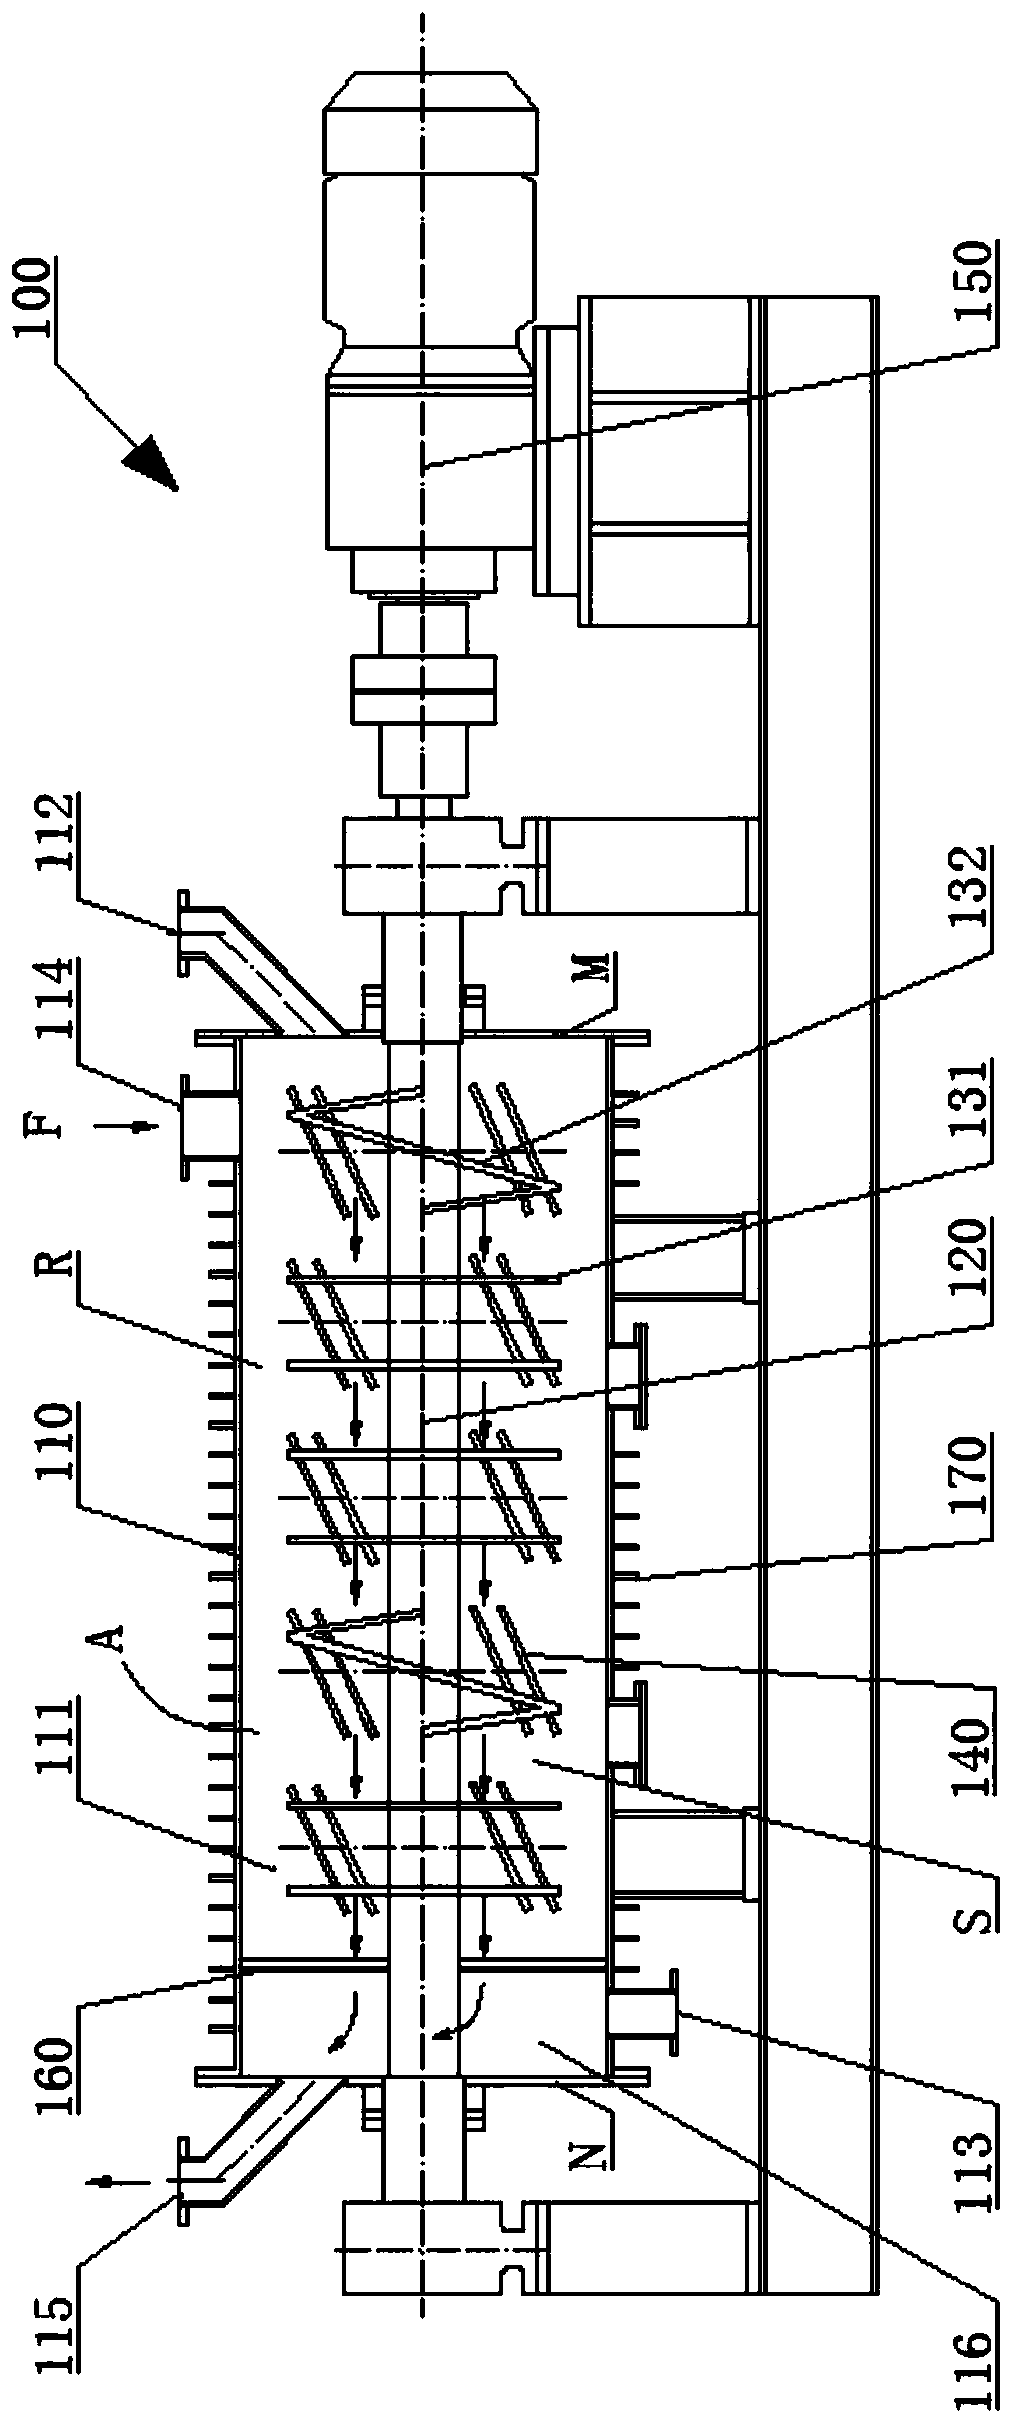 Cement clinker grinding implementation device capable of continuously producing